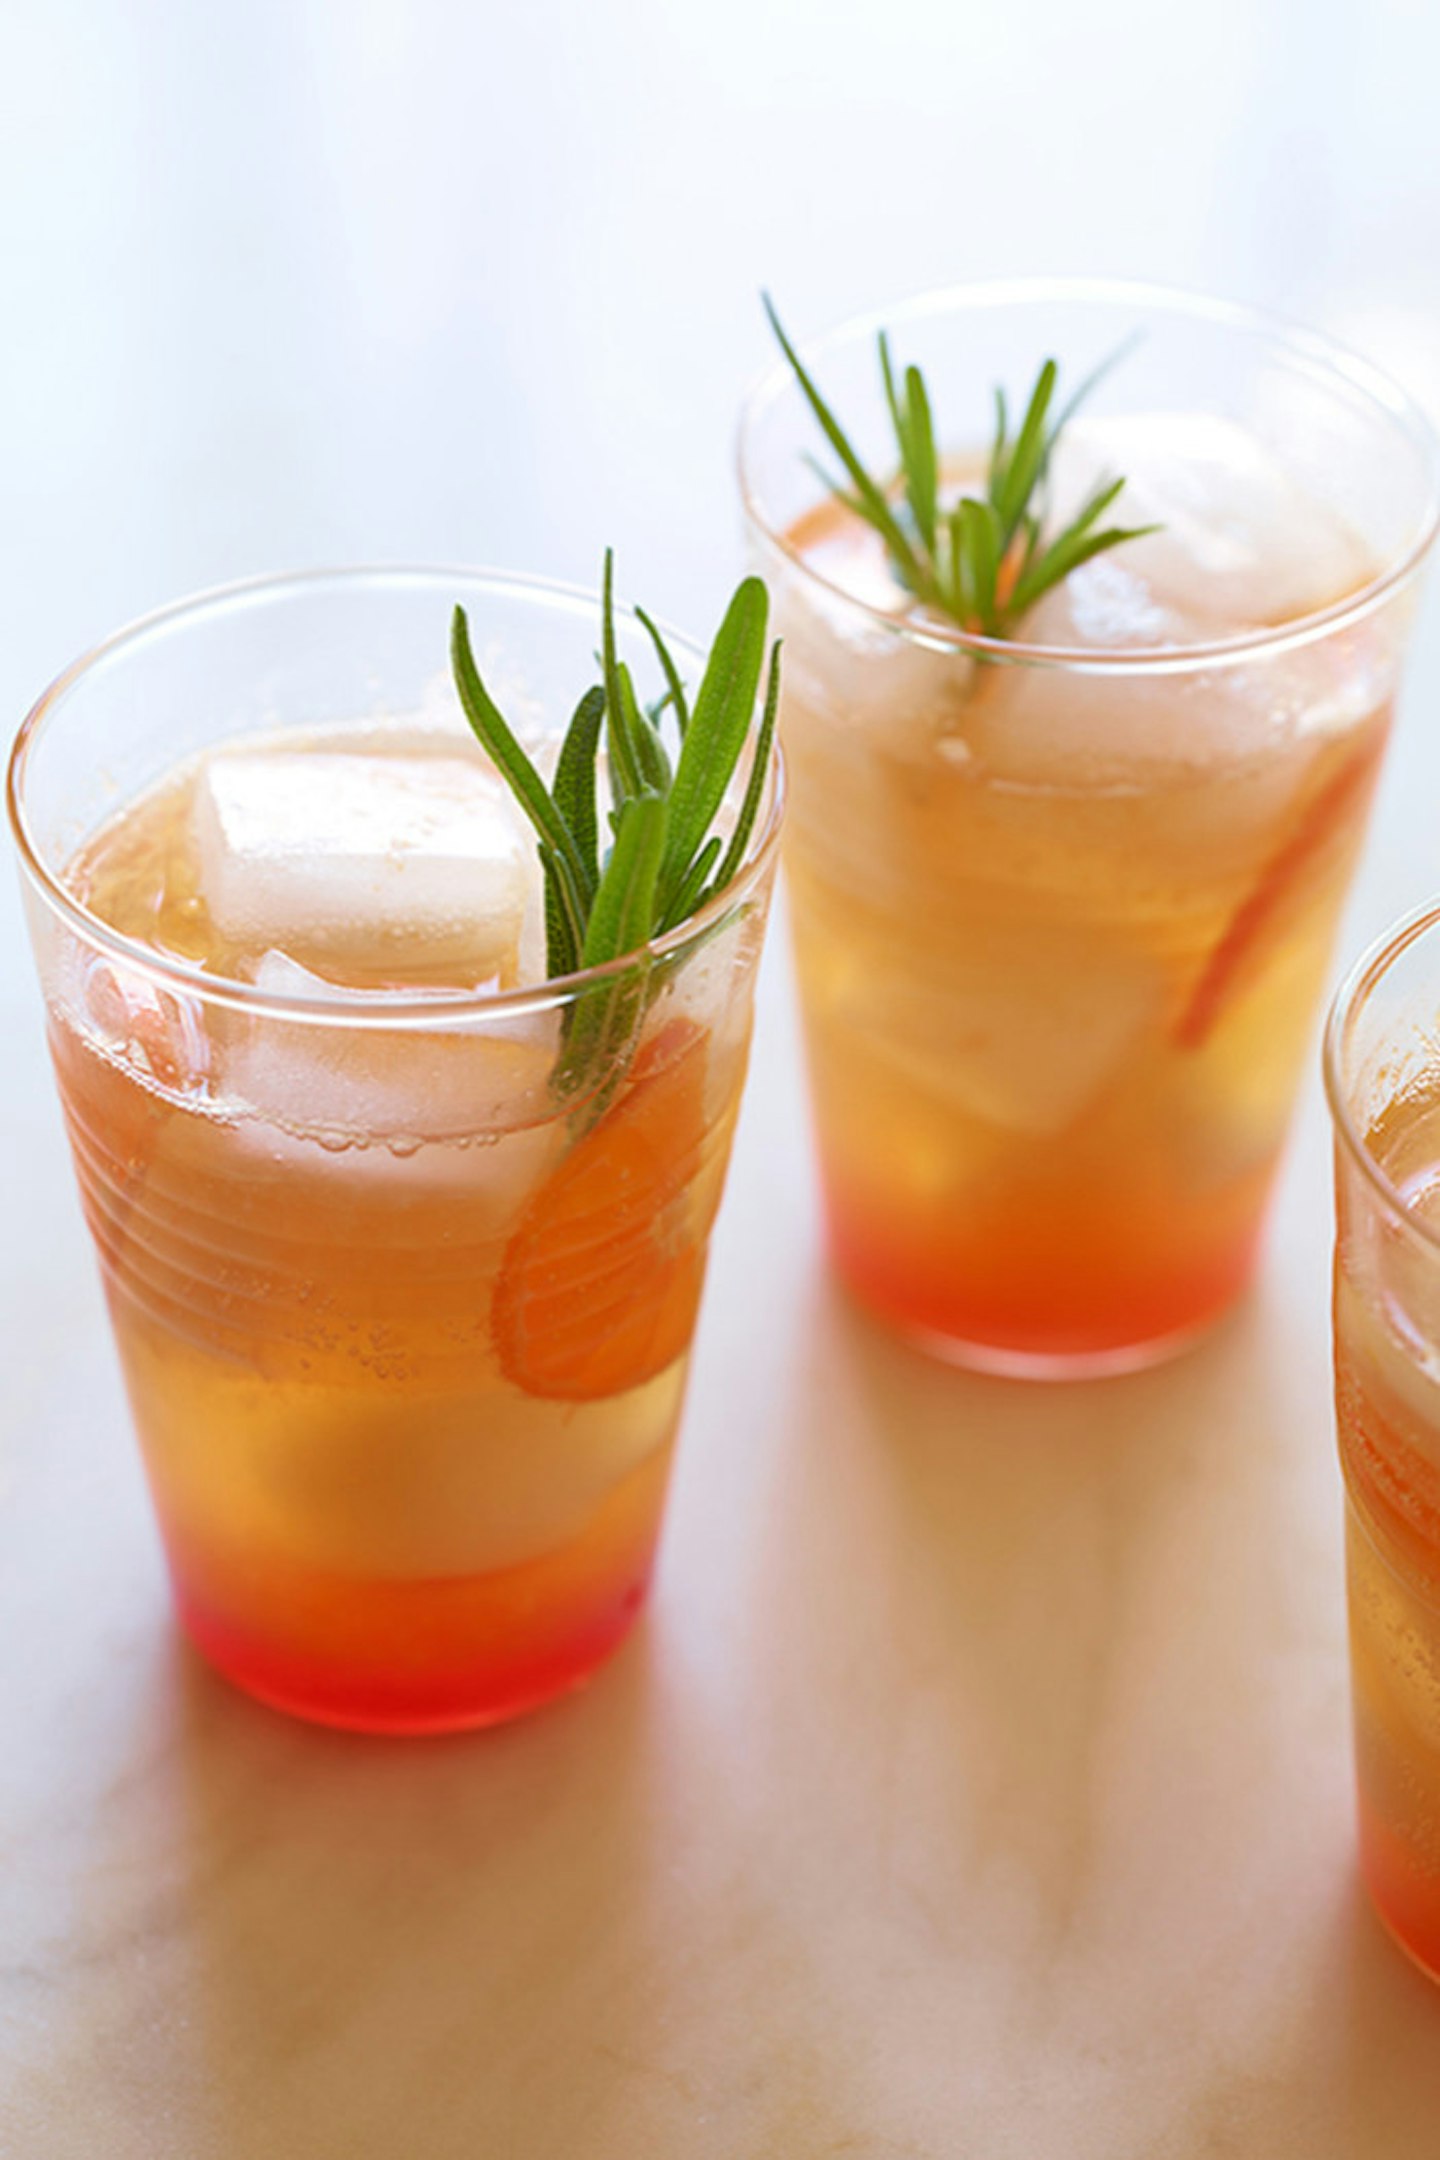 STAY IN FOR - Cranberry, Tangerine, Rosemary and Cream Soda Cocktail